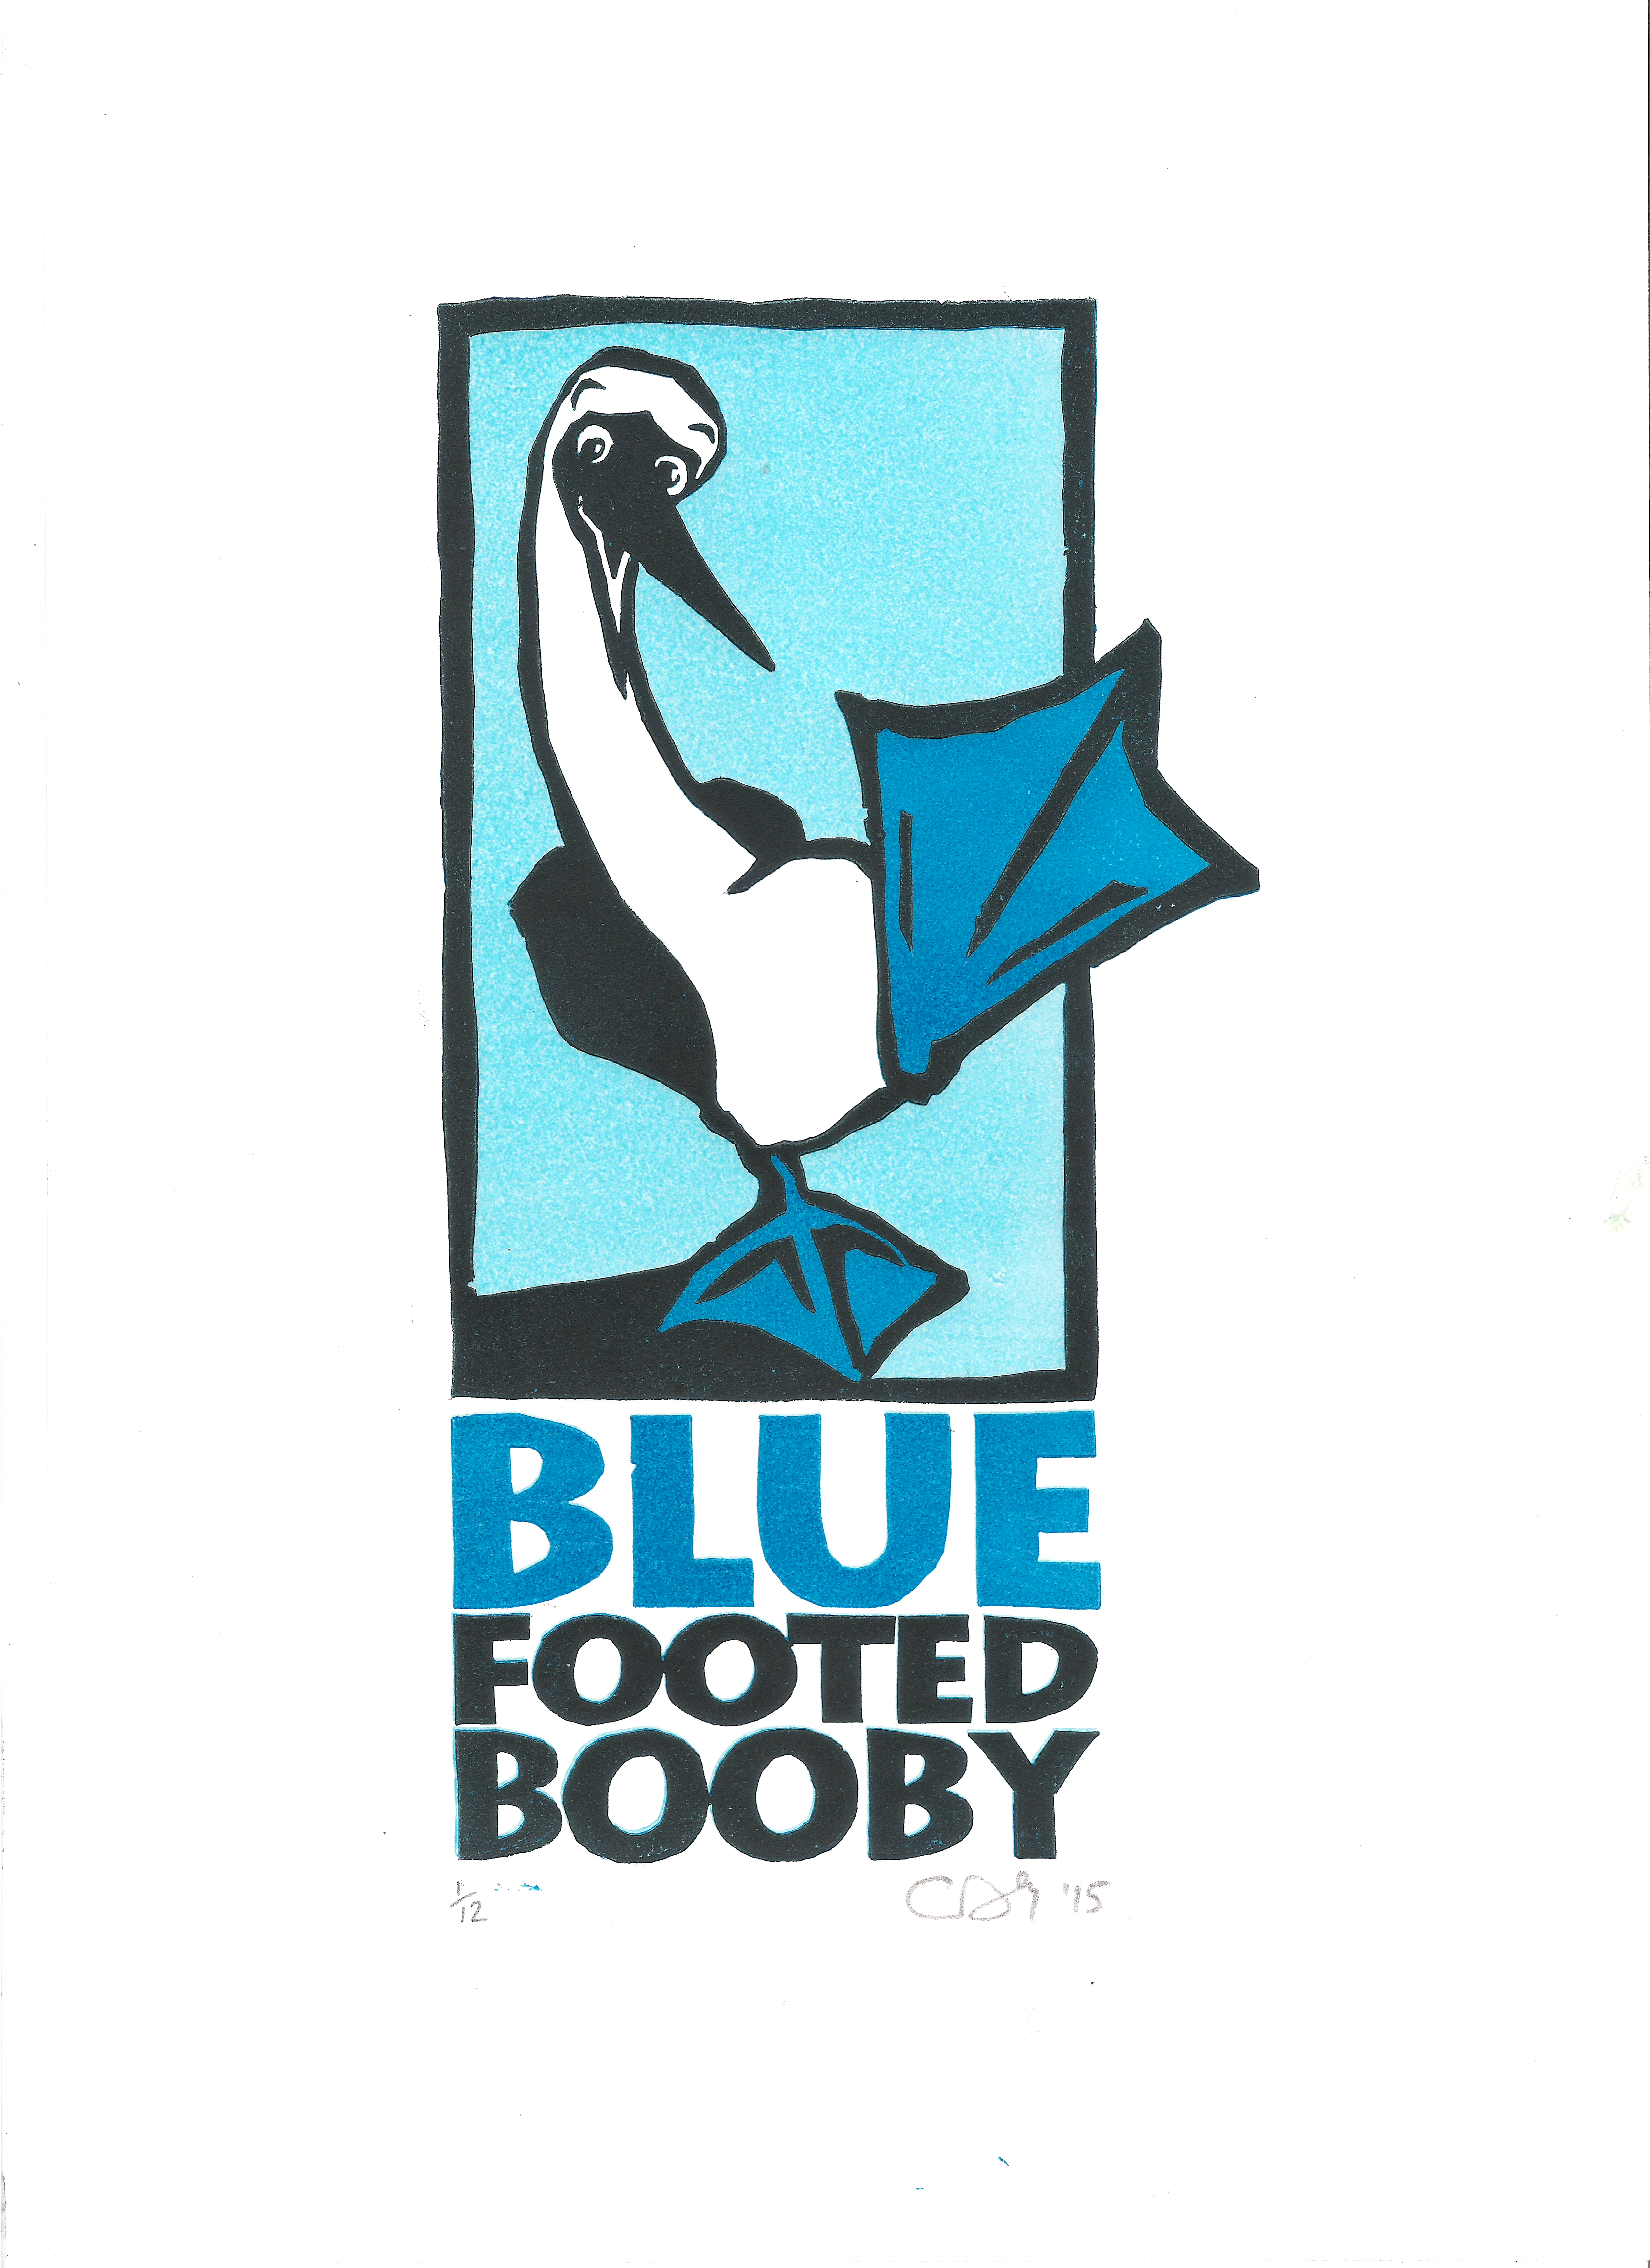 Blue footed booby 1-12